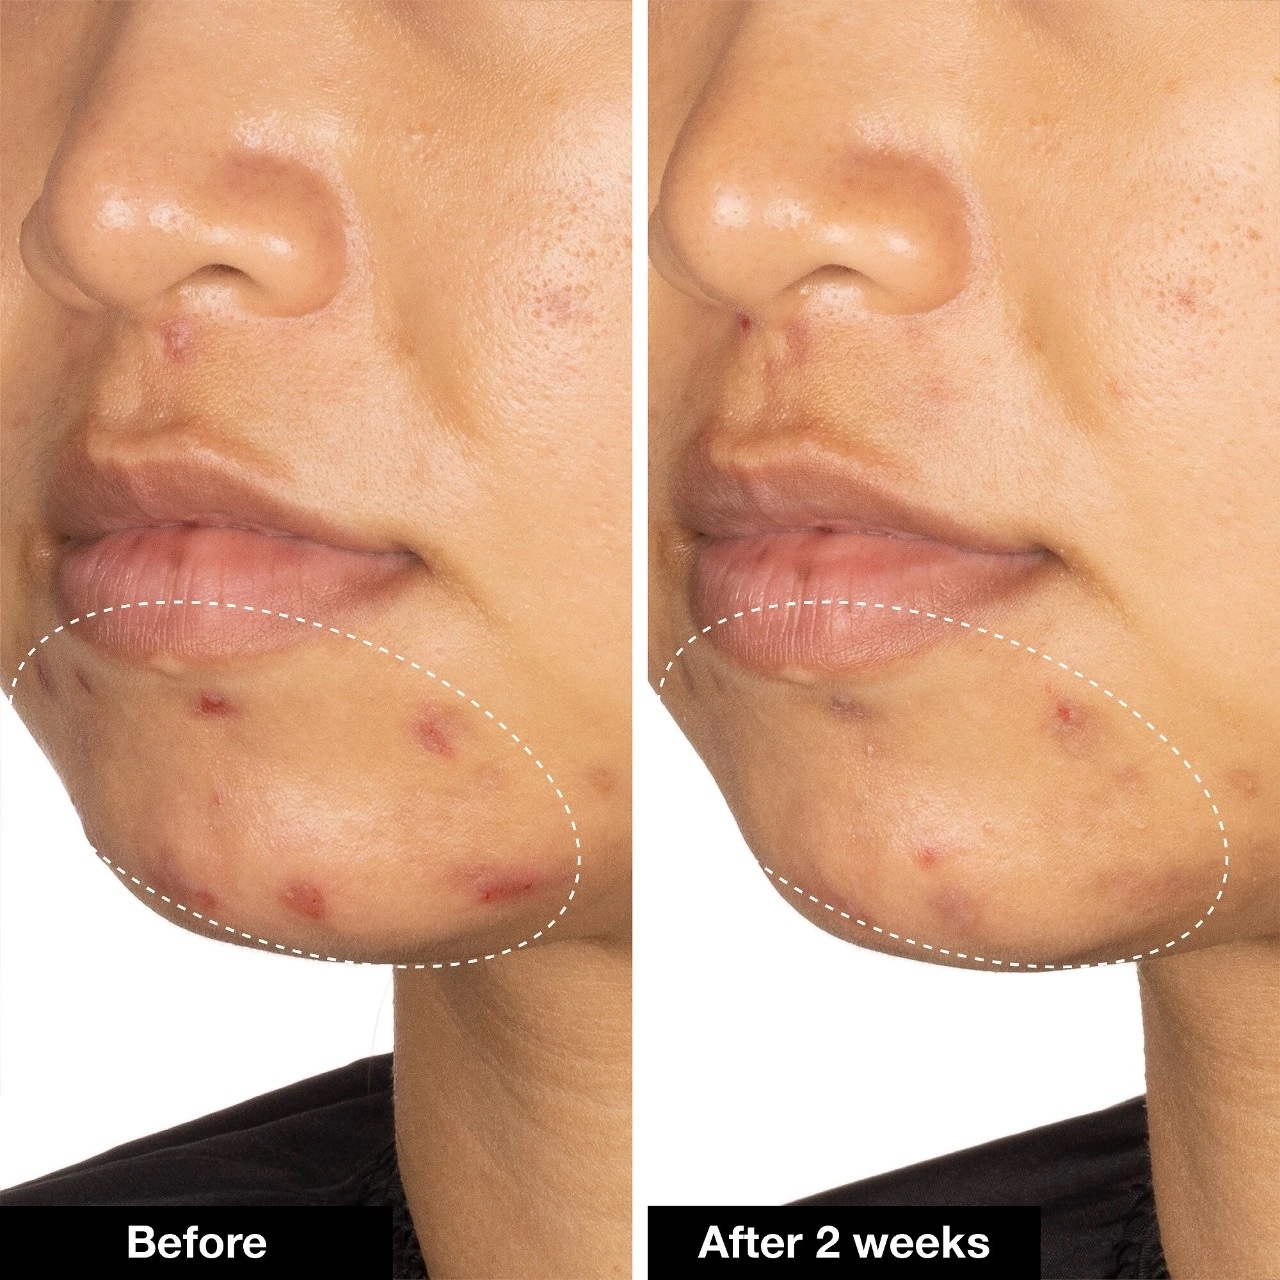 Close-up of a person&#x27;s lower face showing skin improvement from acne treatment before and after two weeks